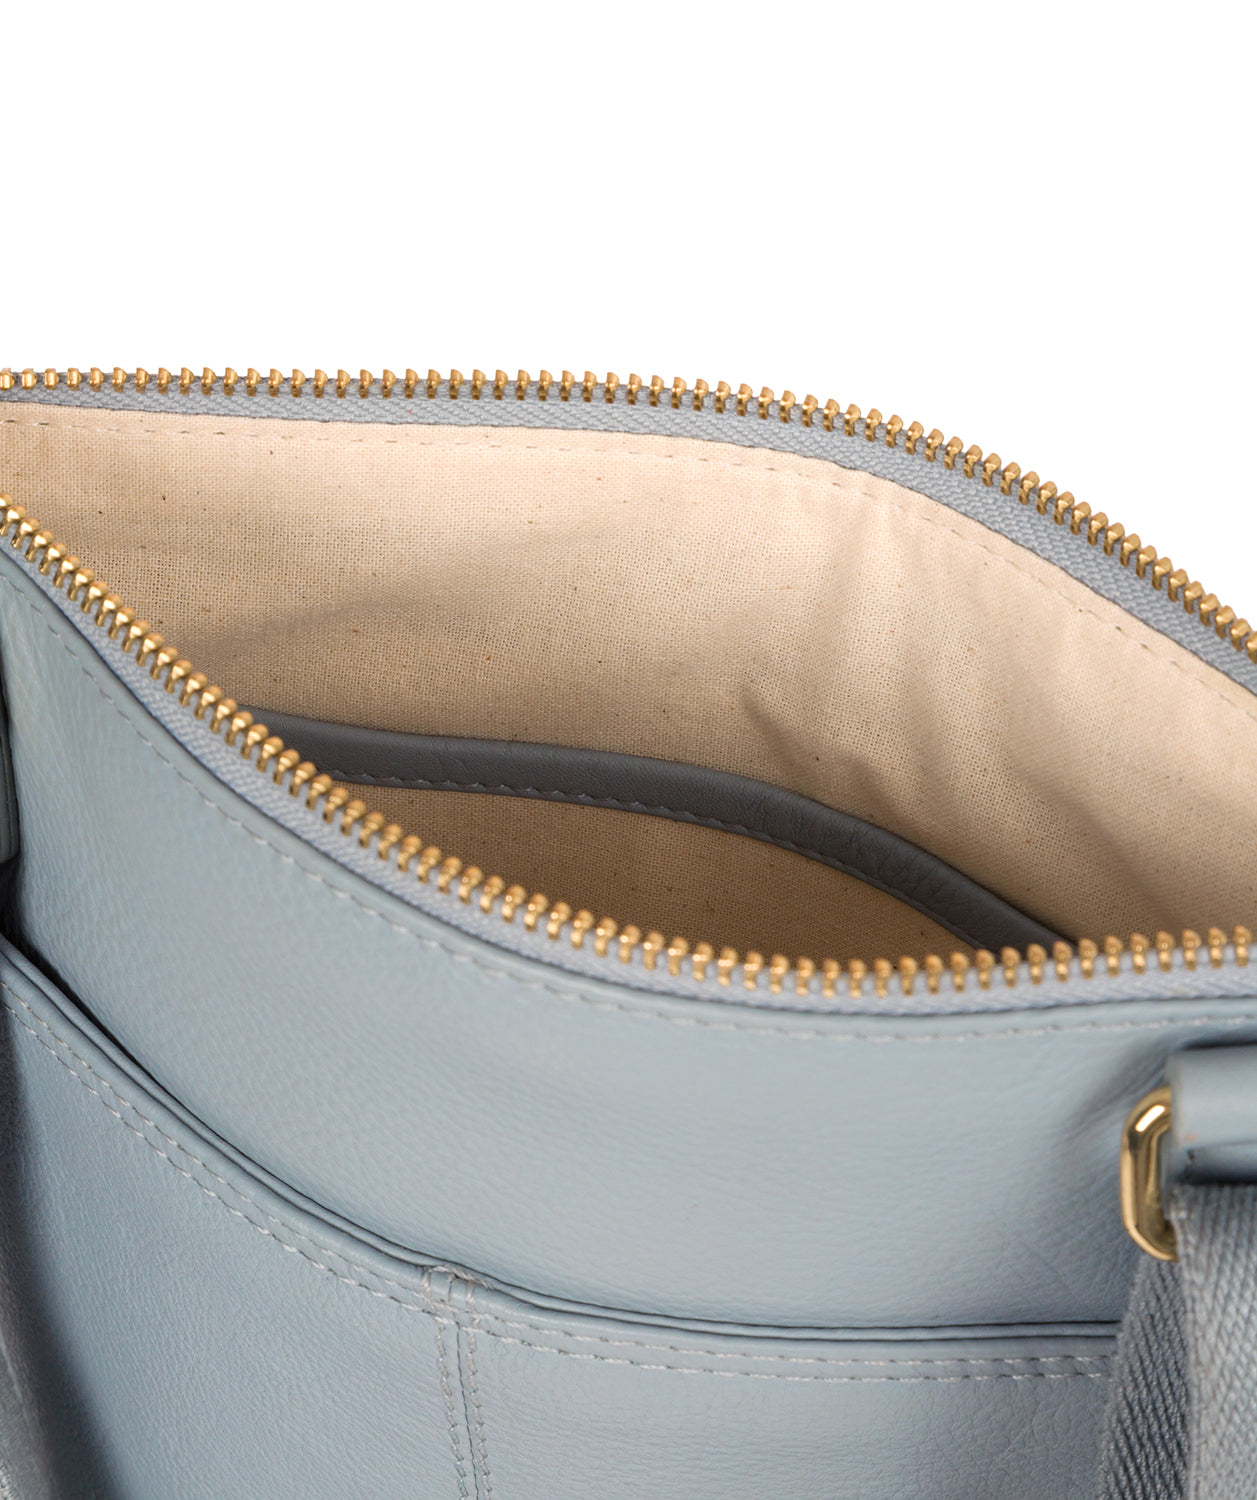 Blue Leather Crossbody Bag 'Langley' by Pure Luxuries – Pure Luxuries ...